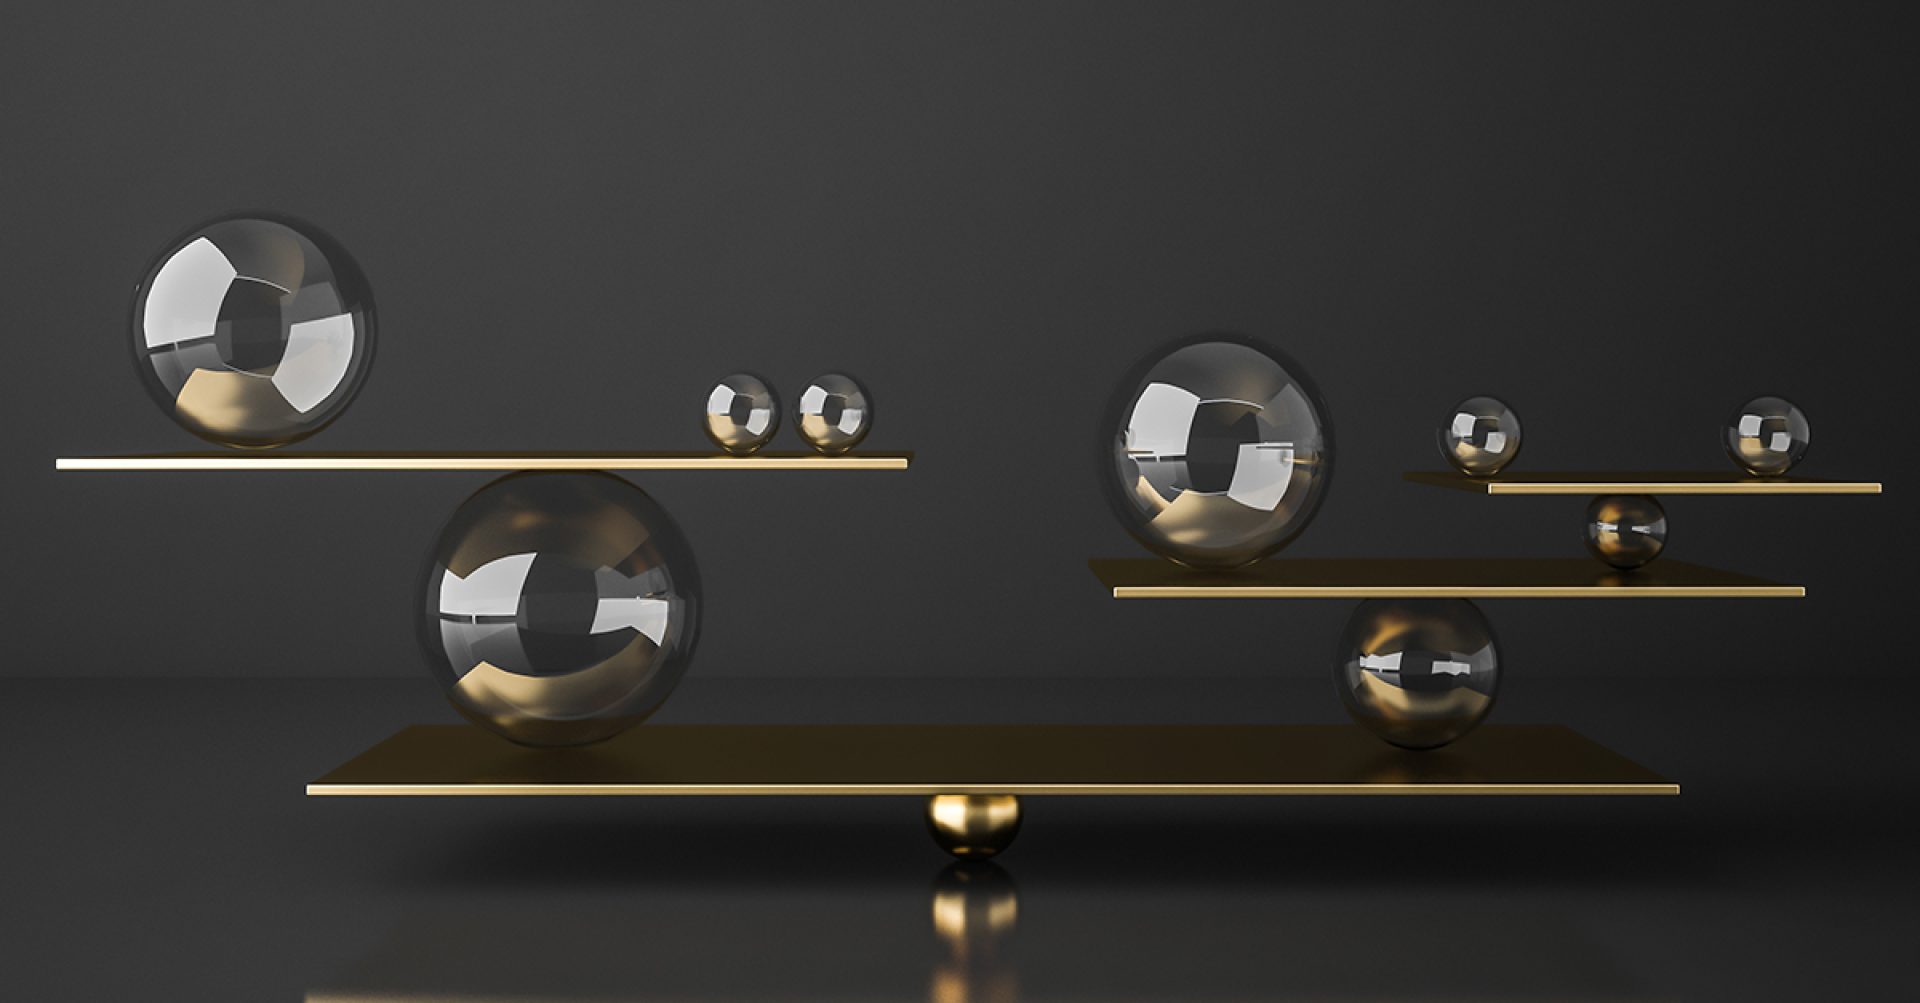 Gold balanced seesaw with glass spheres of different sizes over gray background. Concept of balance. 3d rendering